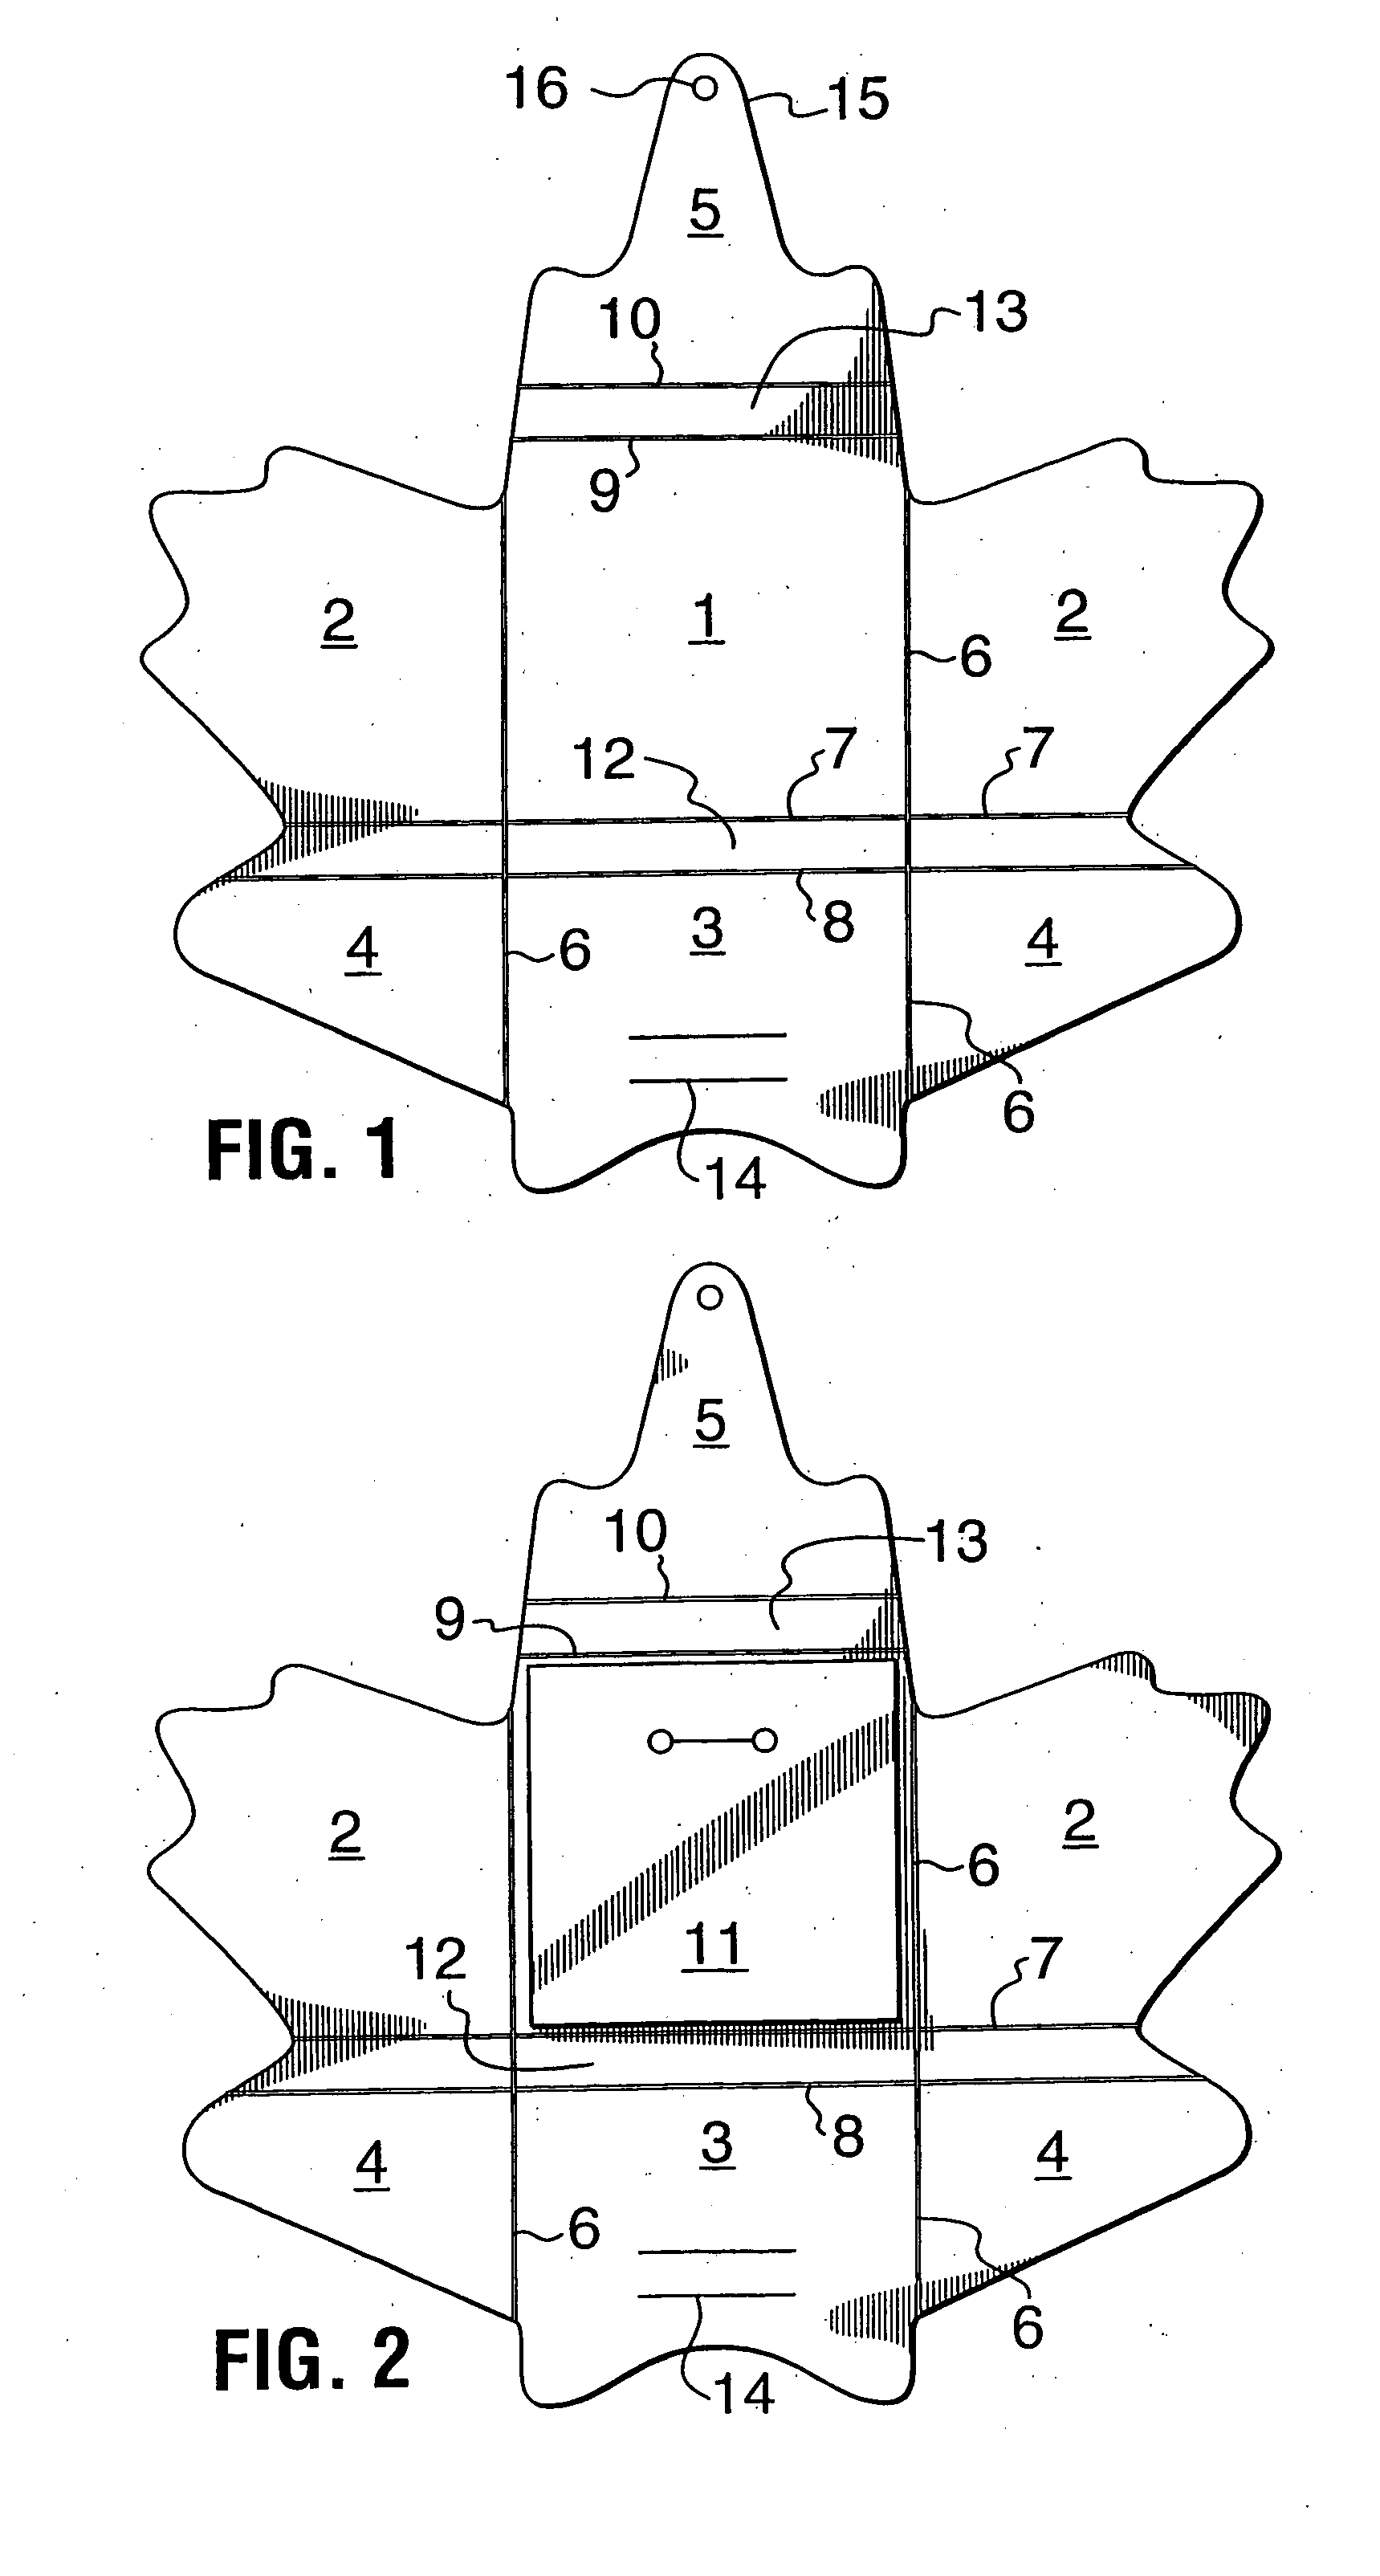 Packaging and display device